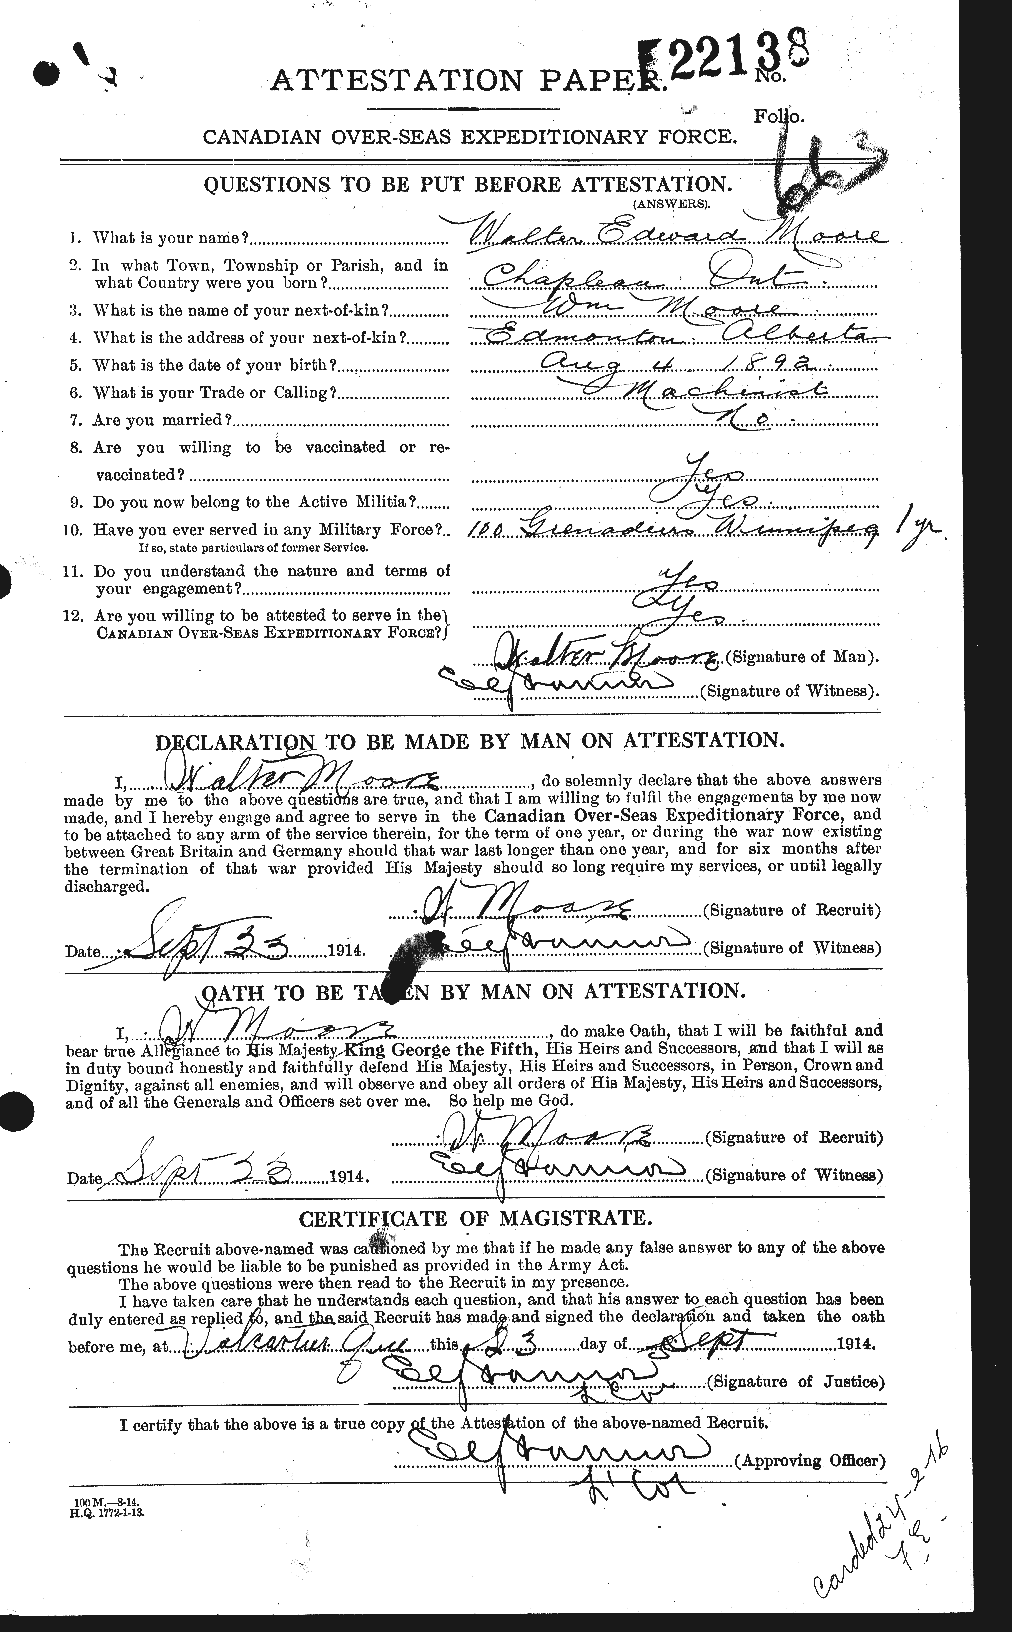 Personnel Records of the First World War - CEF 505702a